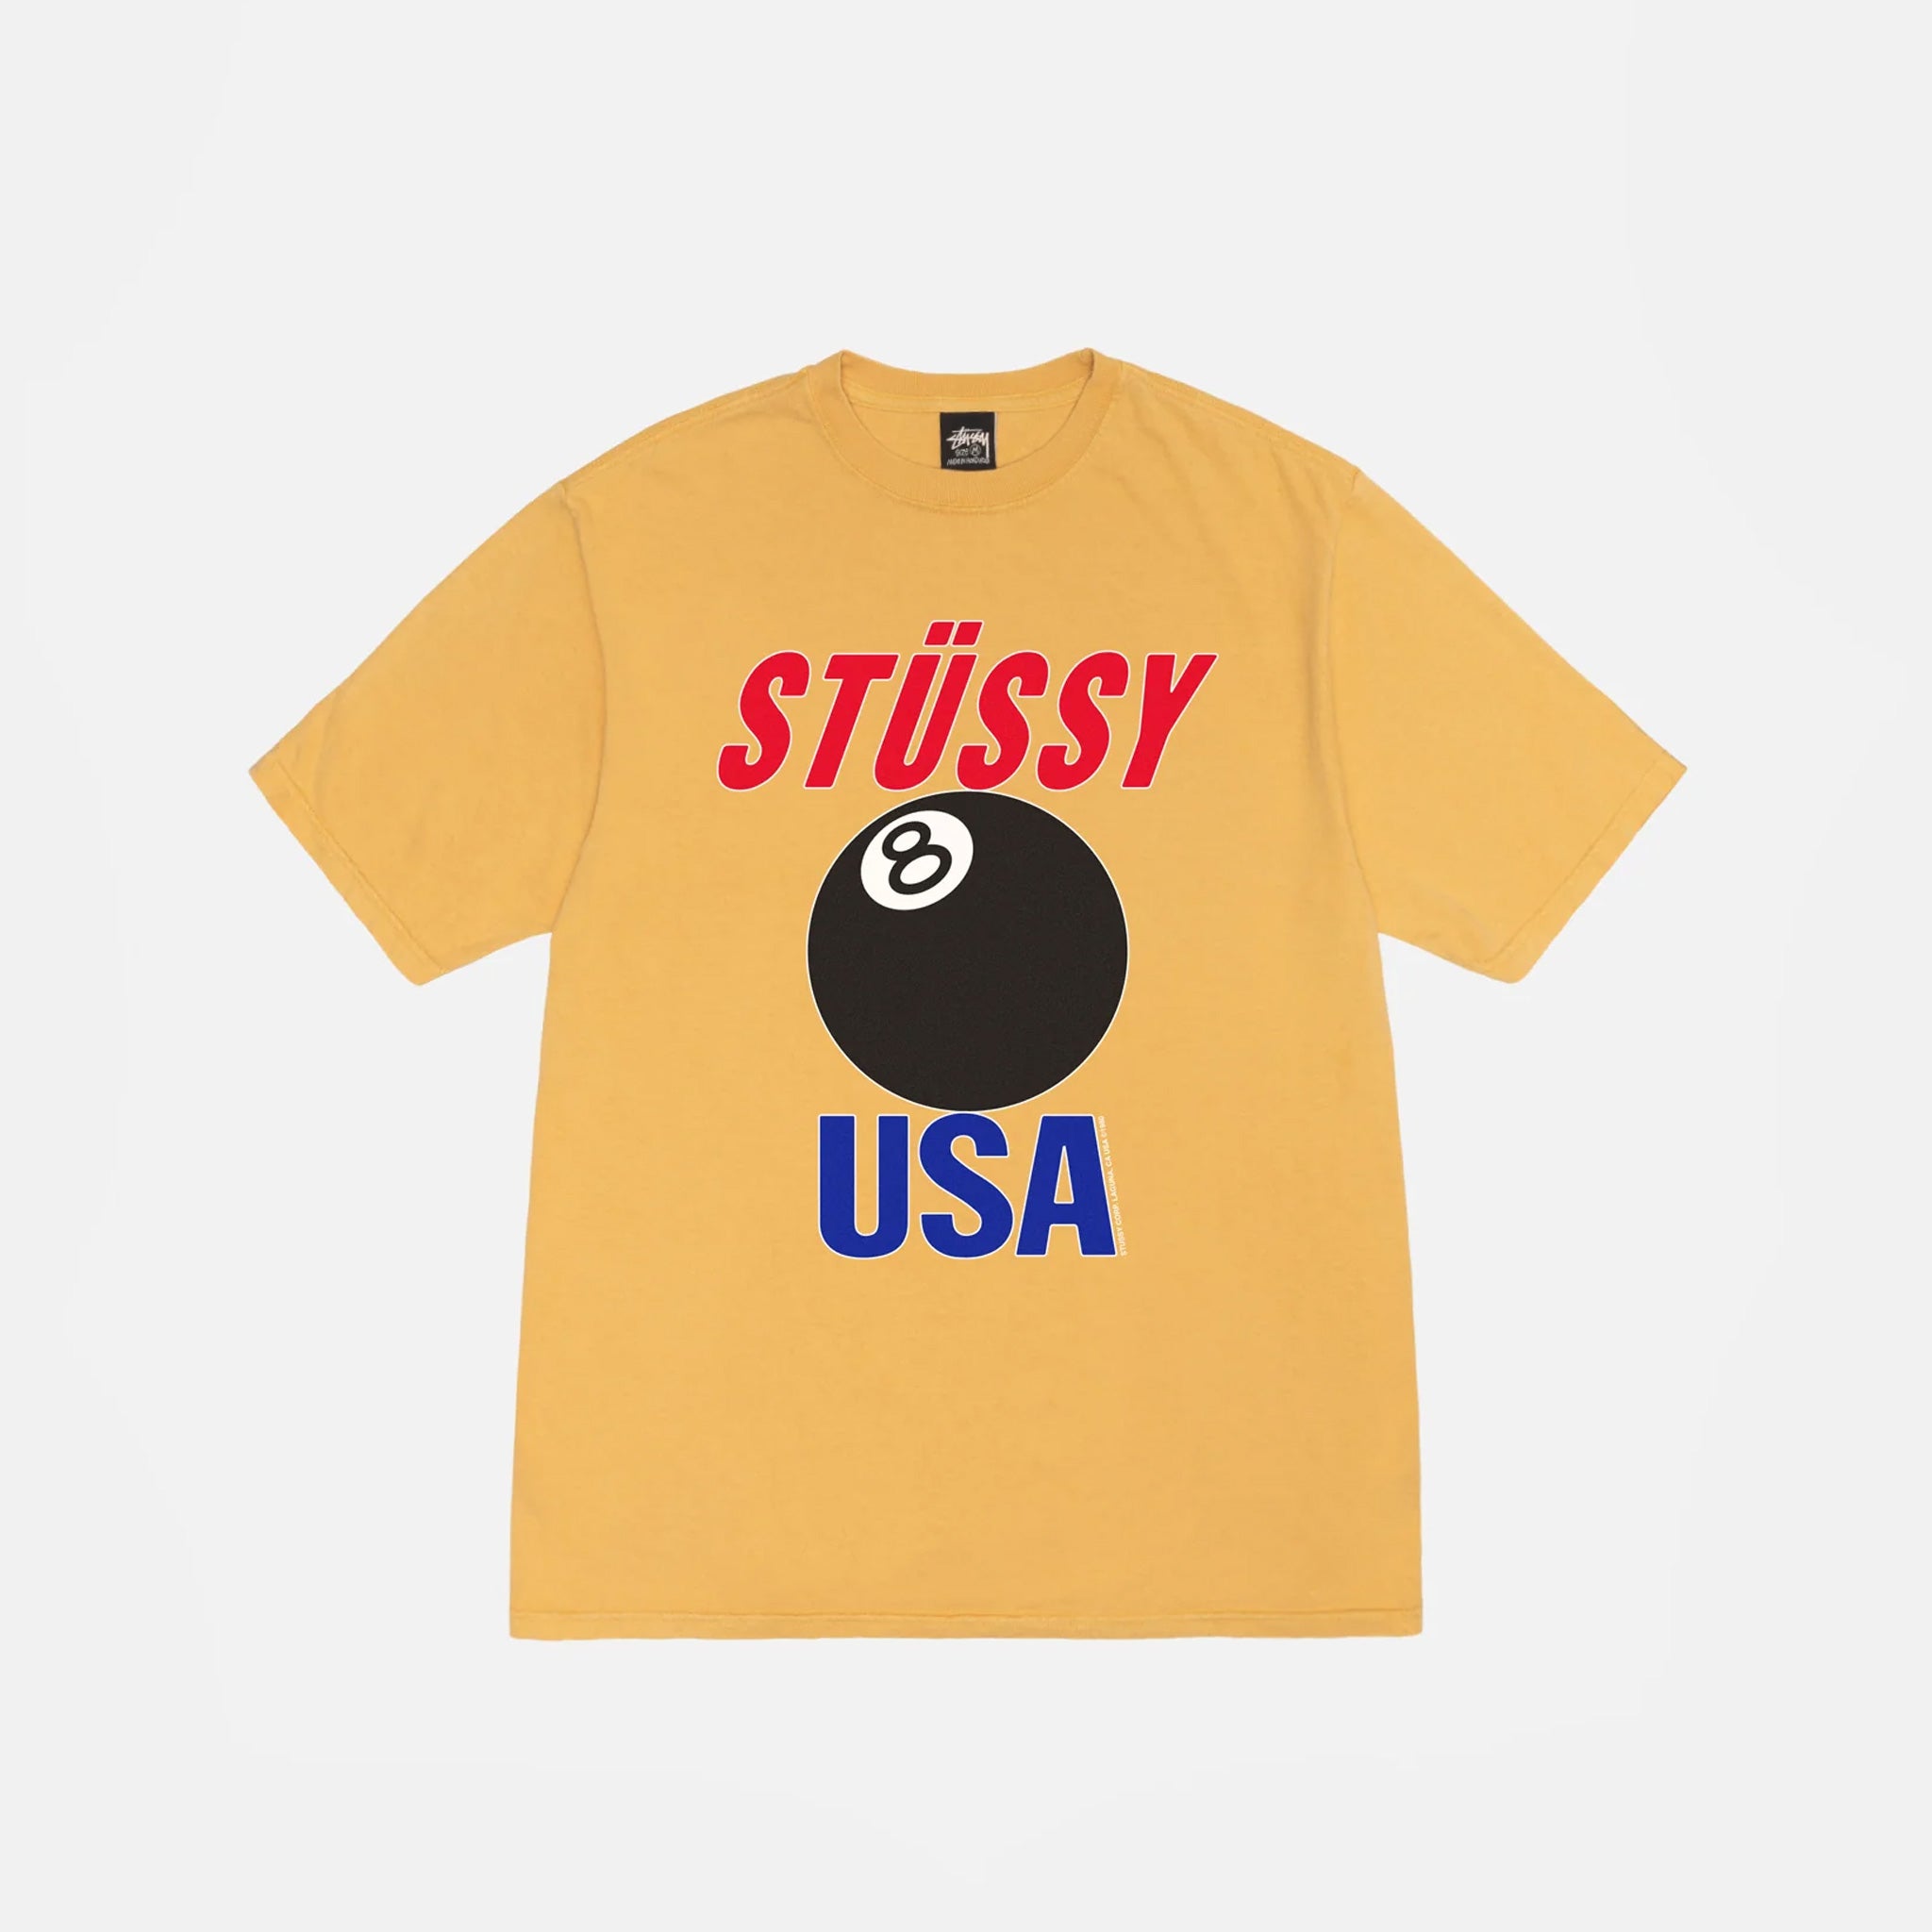 A short sleeved t-shirt with a large screen print graphic of the words STUSSY USA in red and blue and a large black 8-Ball between the words.